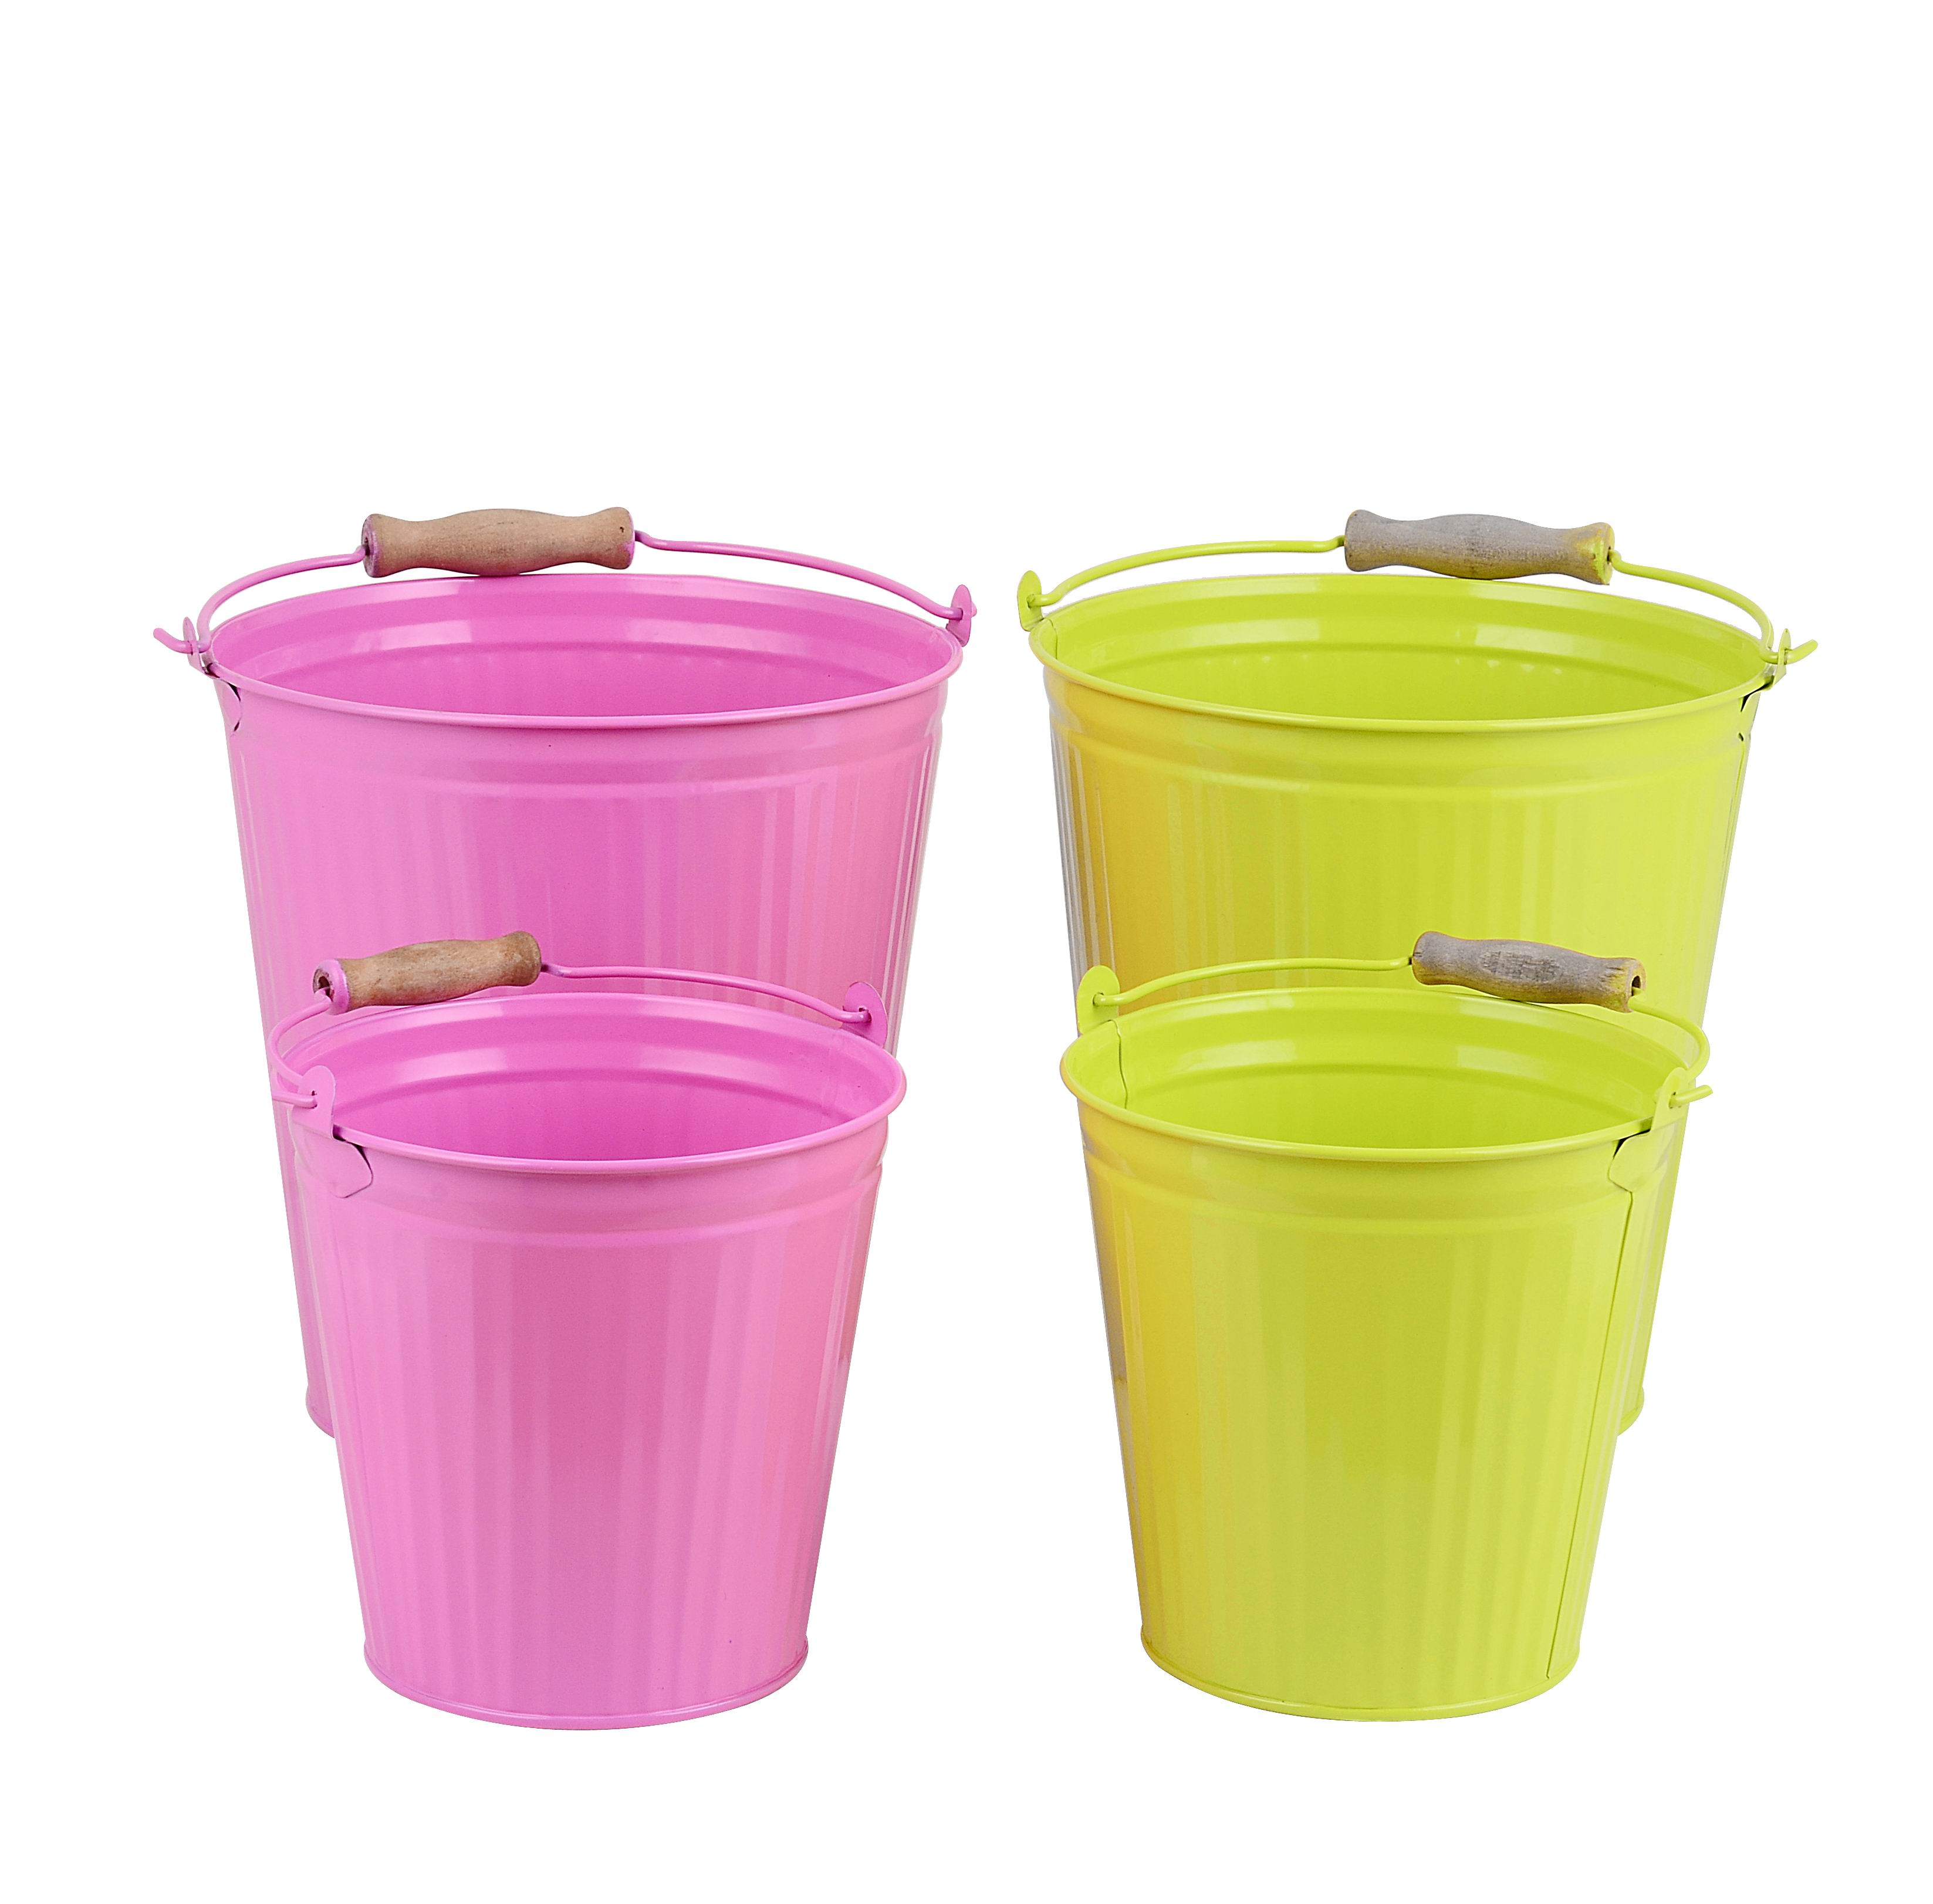 Galvanized Pails and metal containers